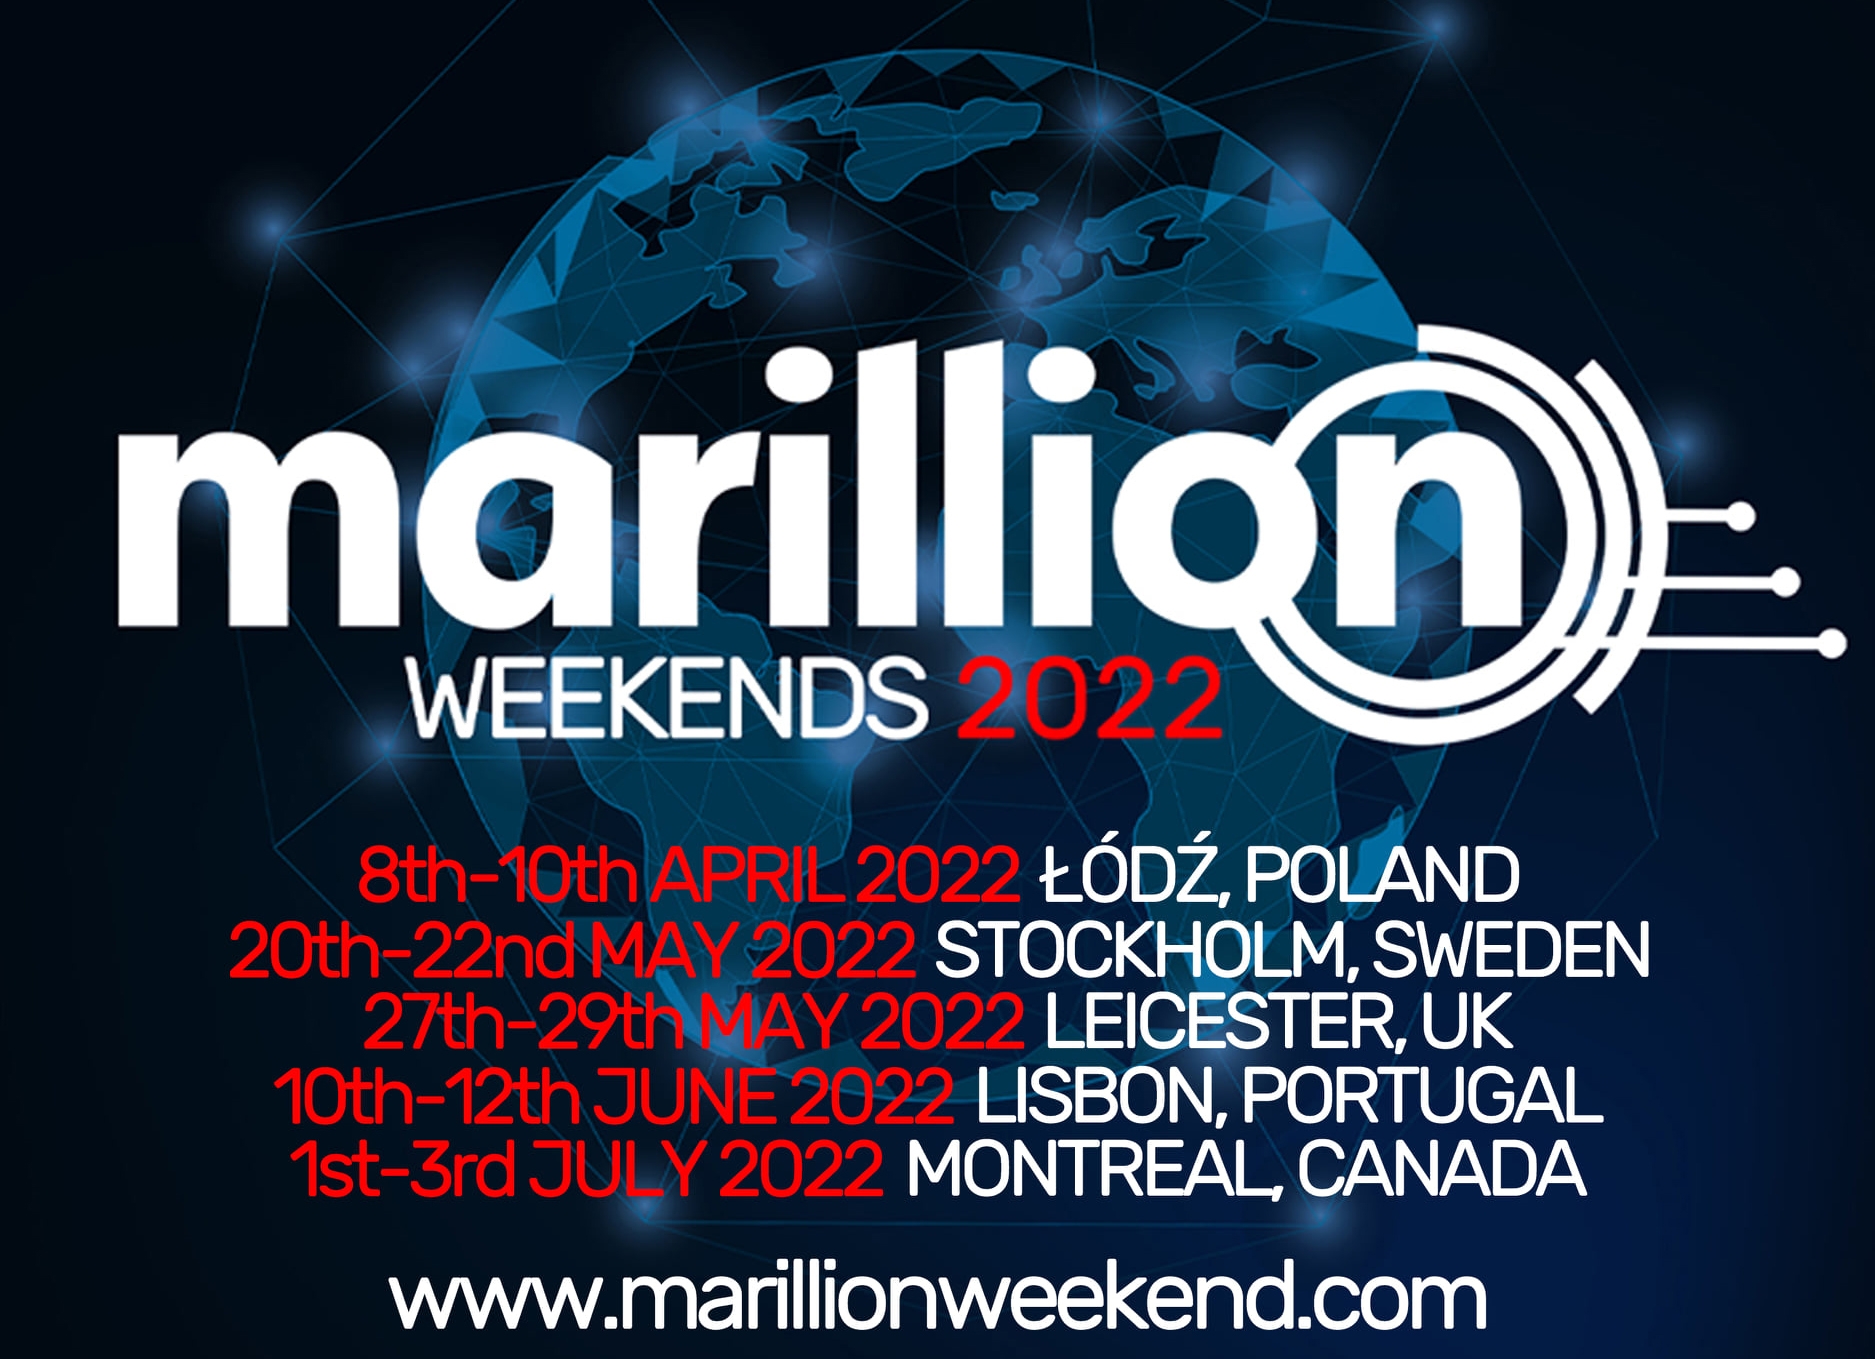 Marillion reveal dates for Marillion Weekends 2022 and update news on